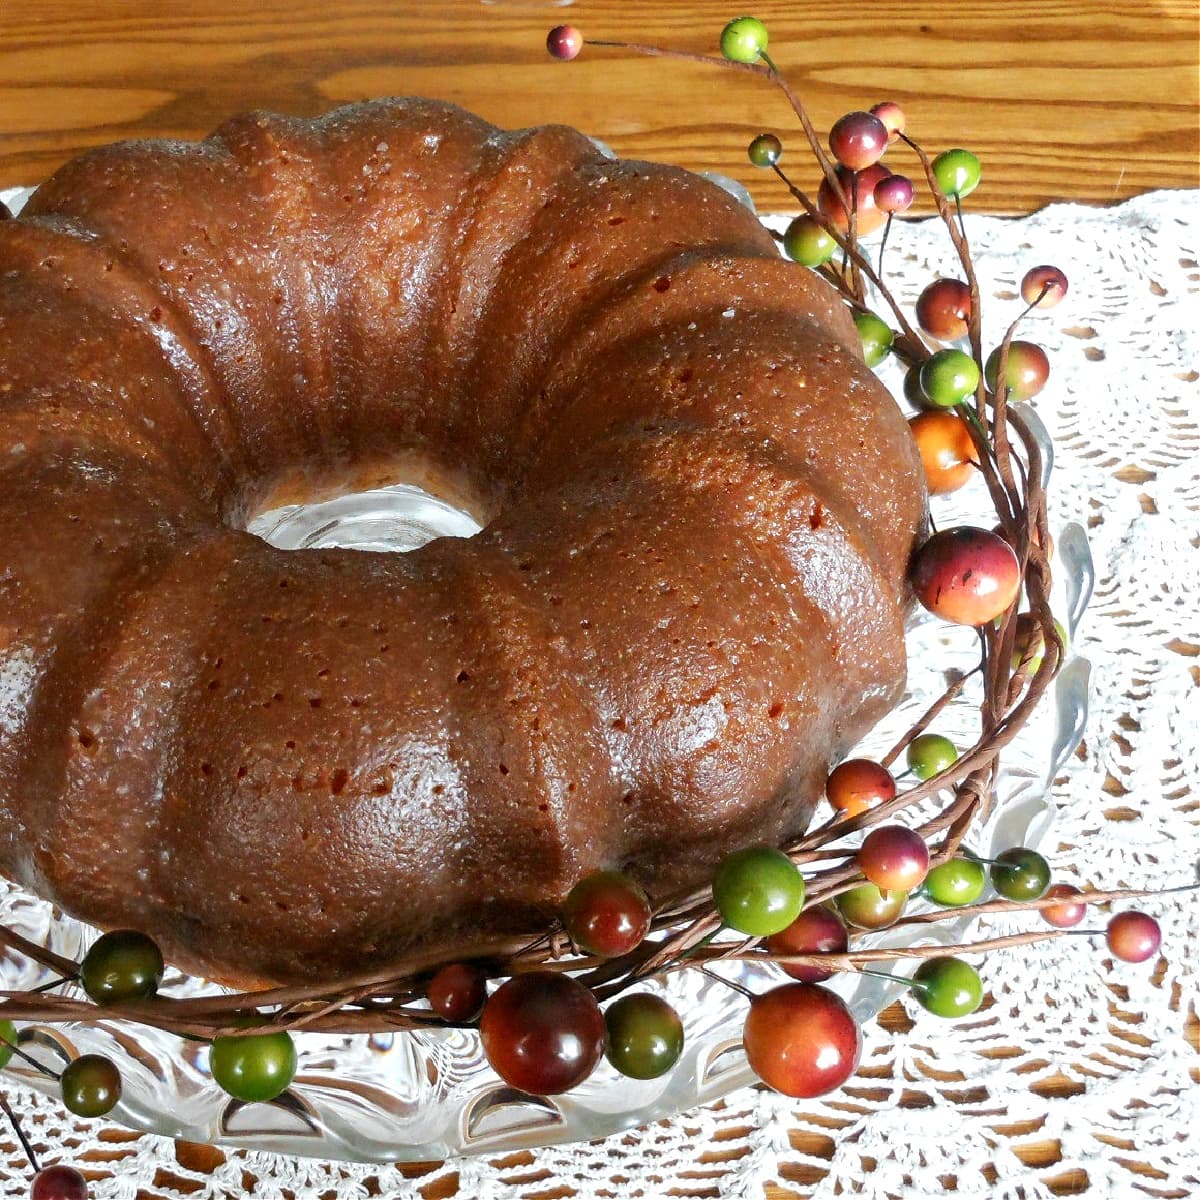 Baked and glazed bundt cake, surrounded with a decorative berry garland.